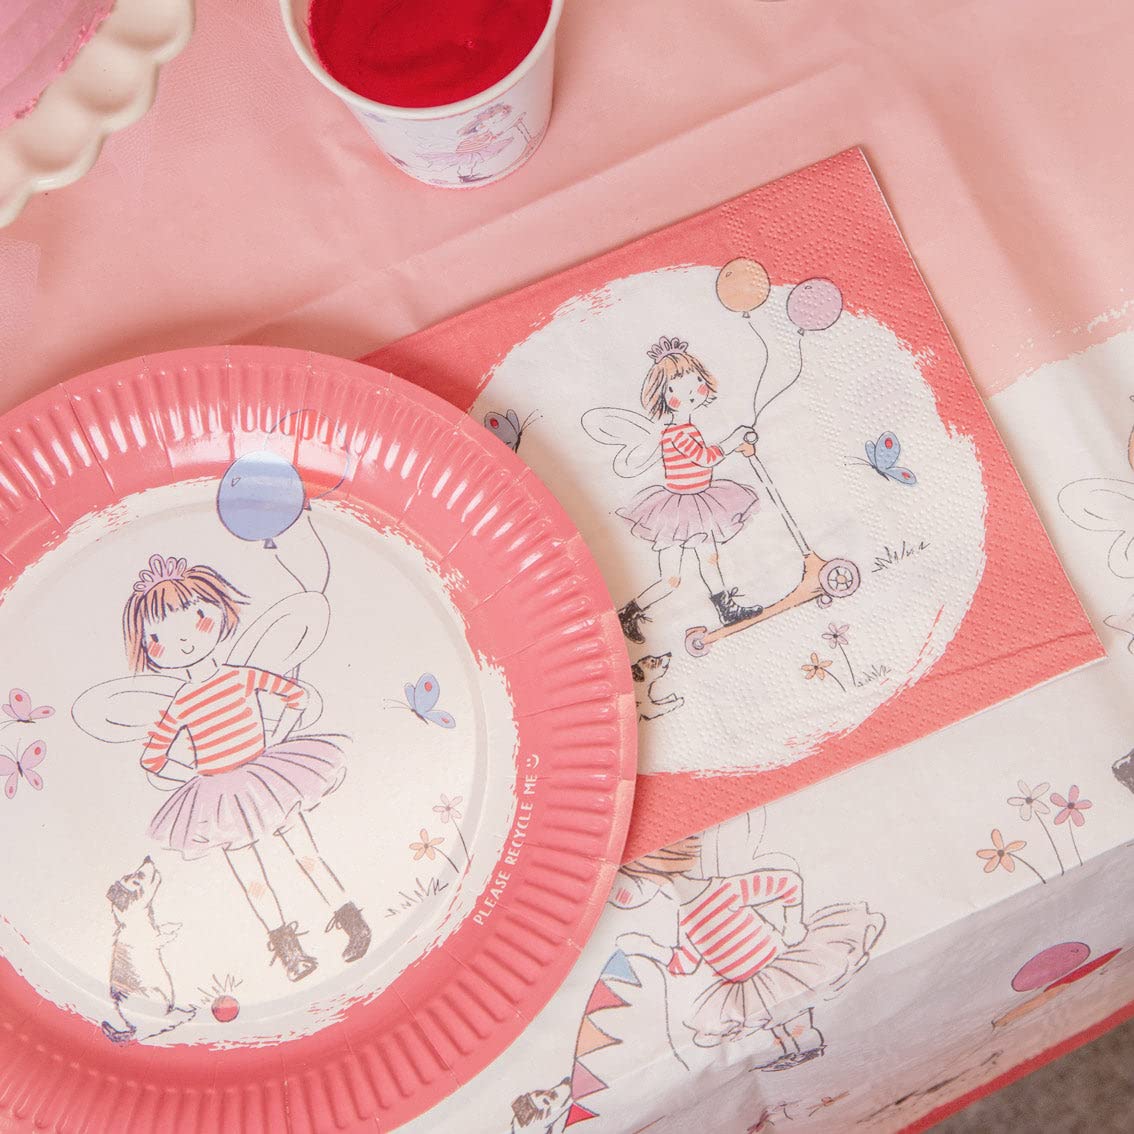 Talking Tables Pack of 12 Tilly & Tigg Pink Paper Plates for Kids Party Supplies | Eco-Friendly Tableware, Recyclable and Disposable | Alternative to Fairy Princess Birthday, Picnic, Girls Sleepover